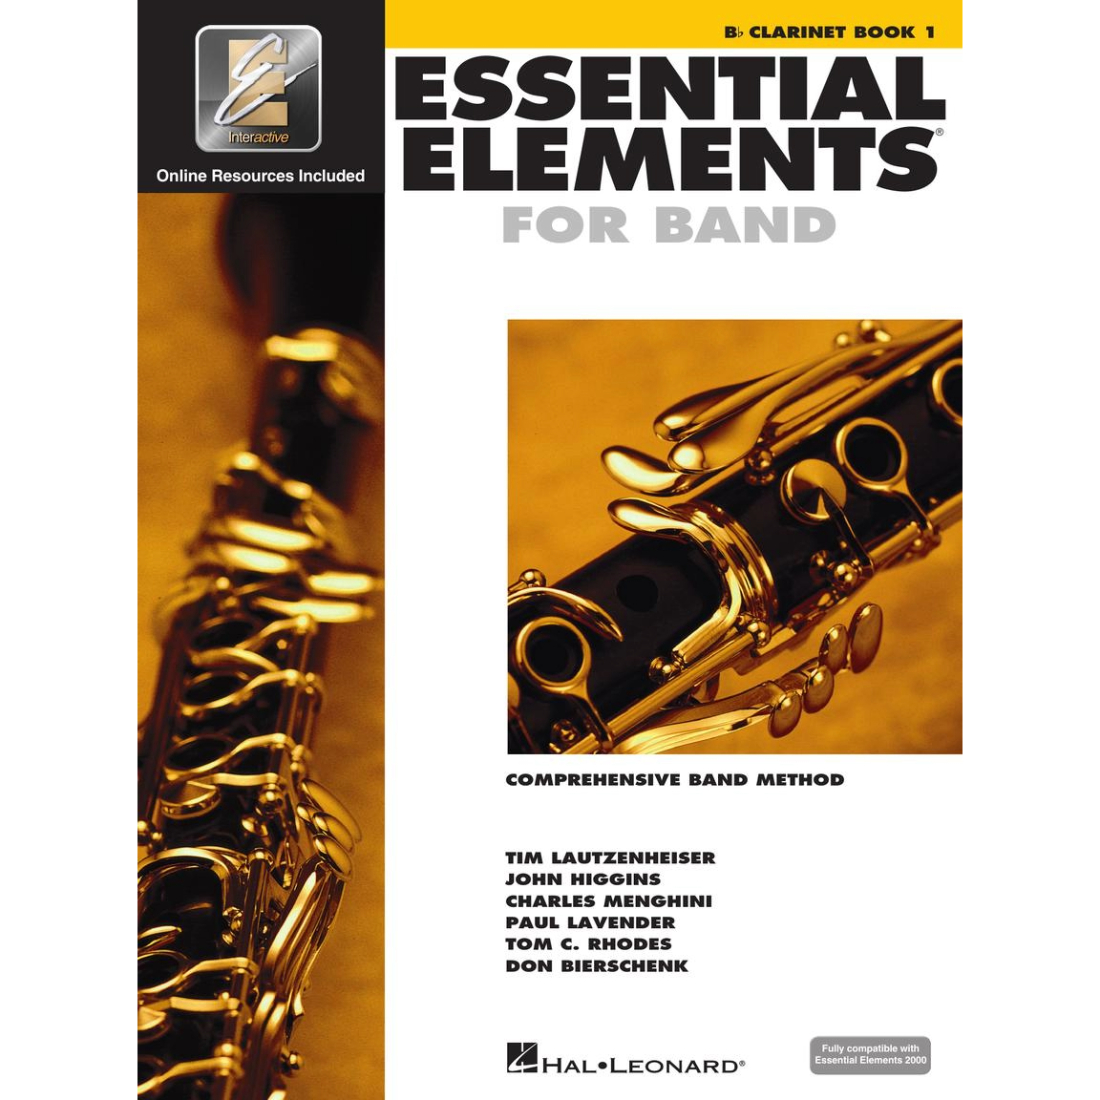 White cover with images of instruments titled essential elements for band book 1